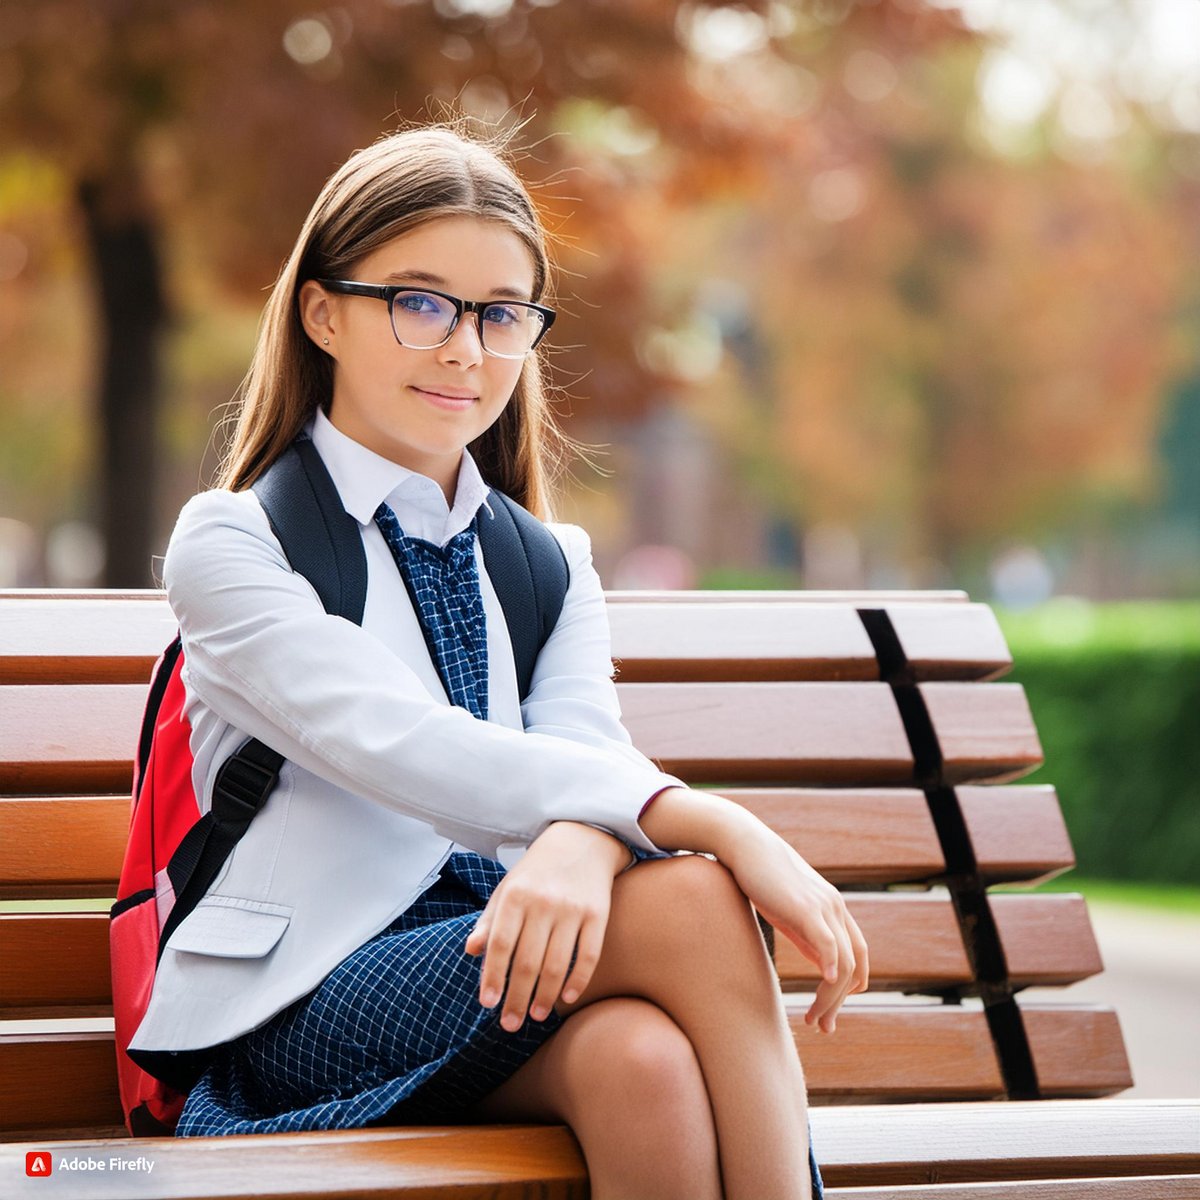 Firefly 12 years old girl sitting in the park on a bench 44387.j